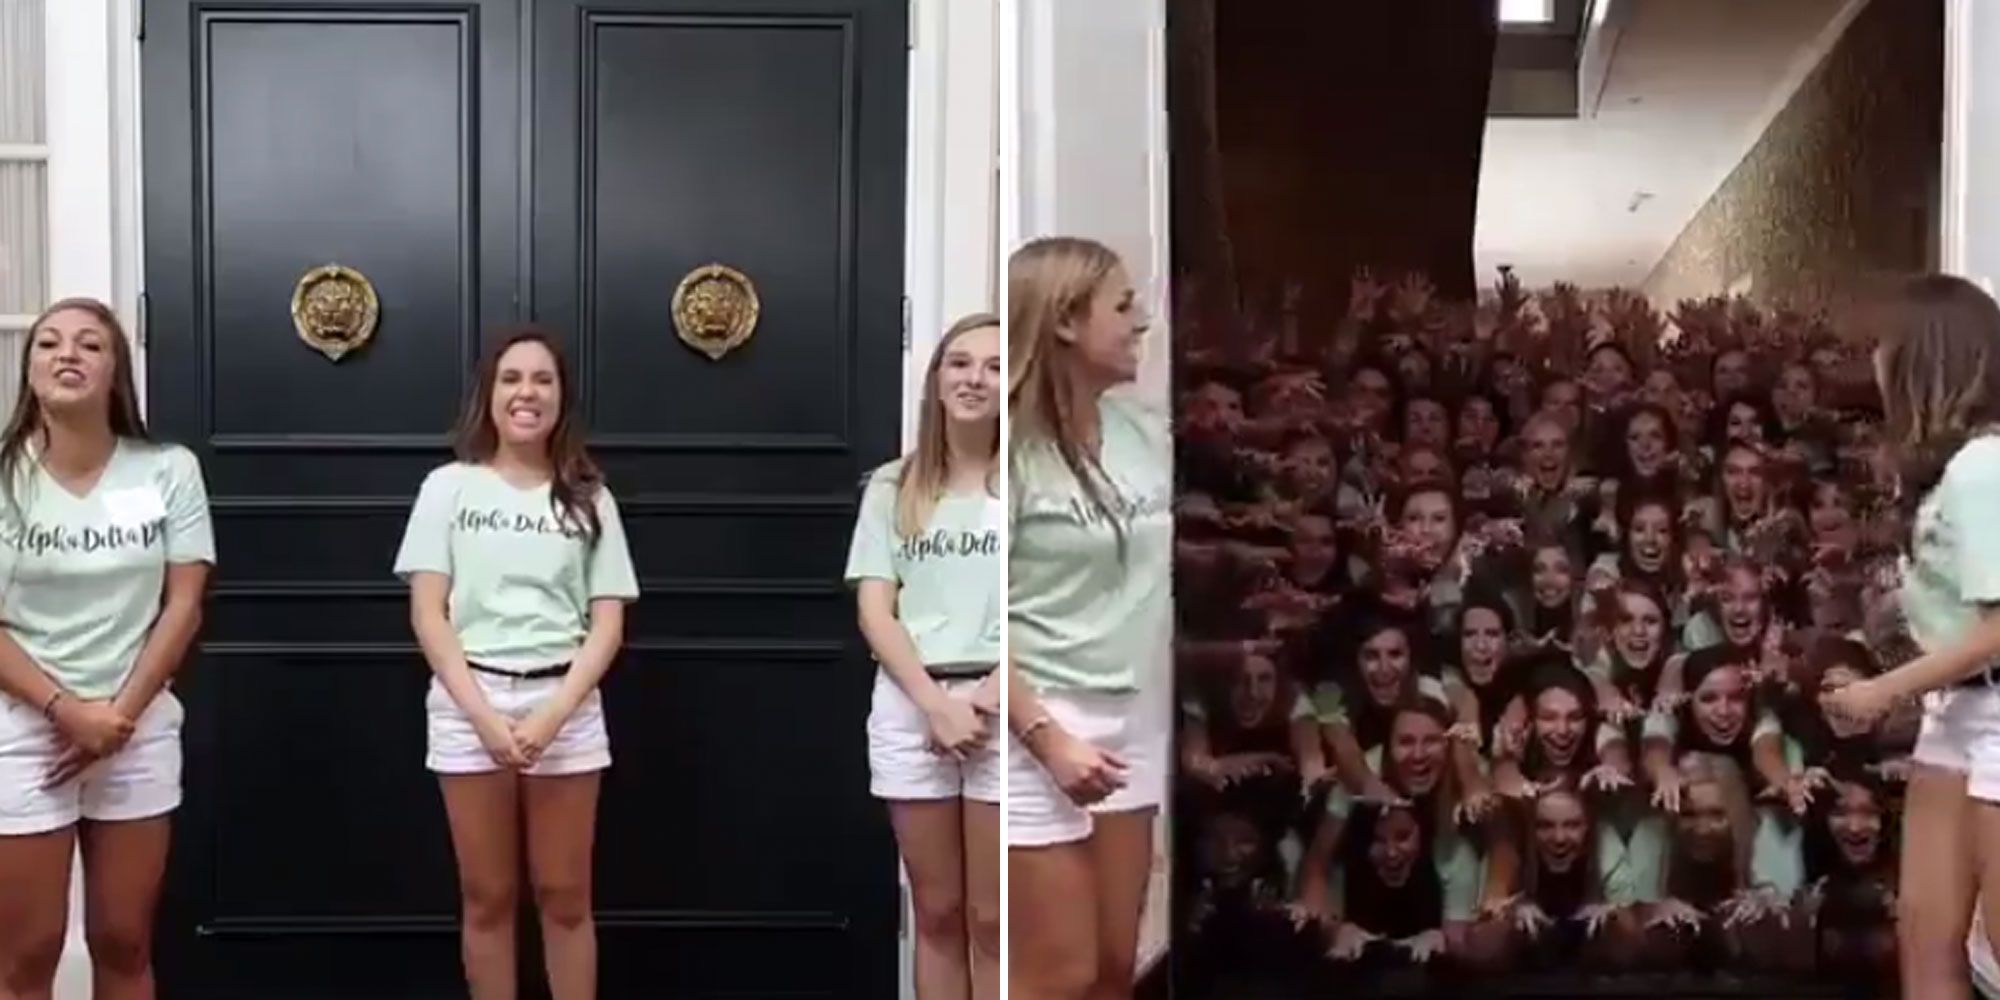 Oh Relax, That Viral Sorority Recruitment Video Isnt Nearly as Scary as Everyone Says It Is pic